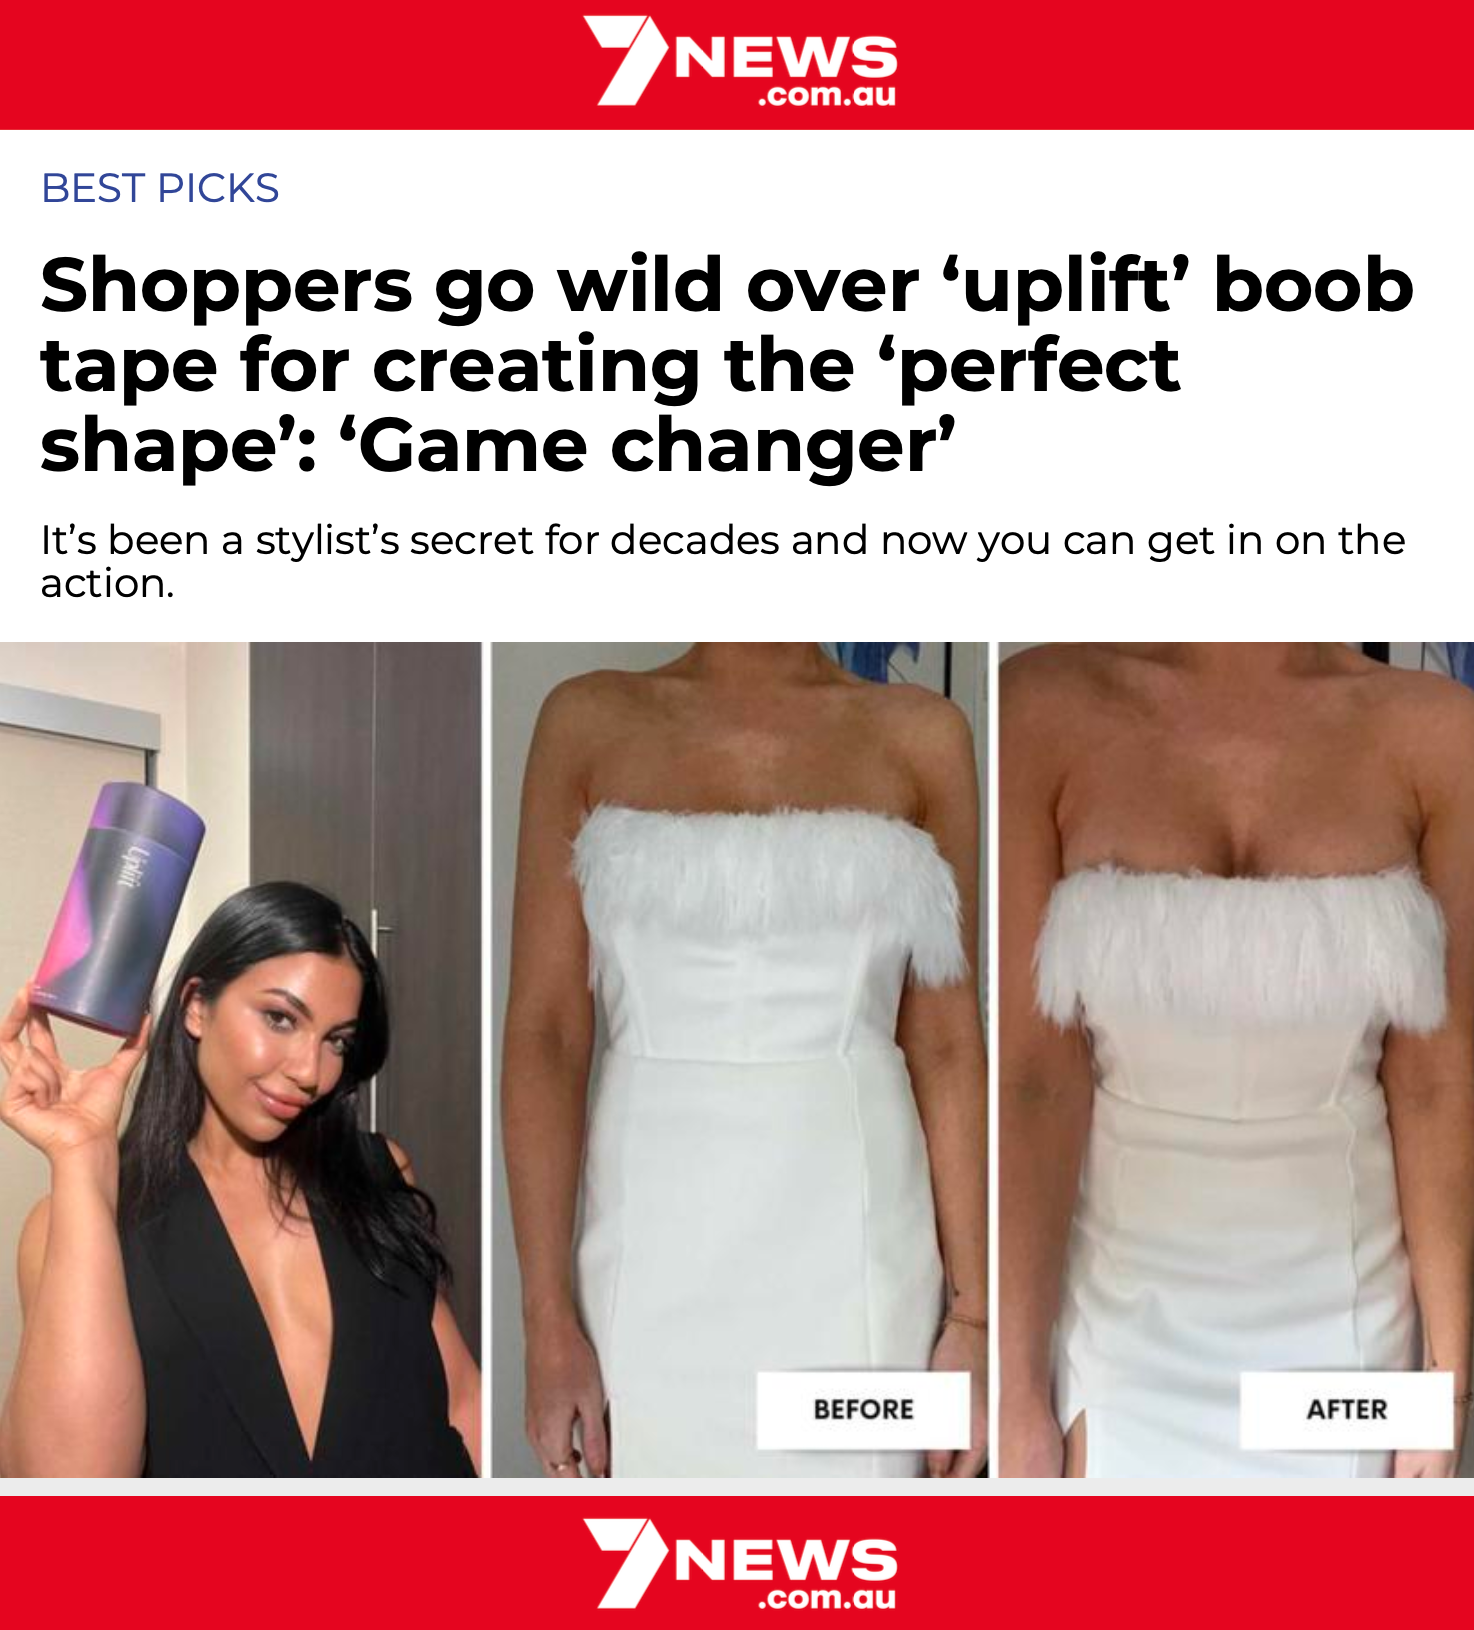 7 News Chooses Uplift Skin Boob Tape as the Best Choice: Here's Why!